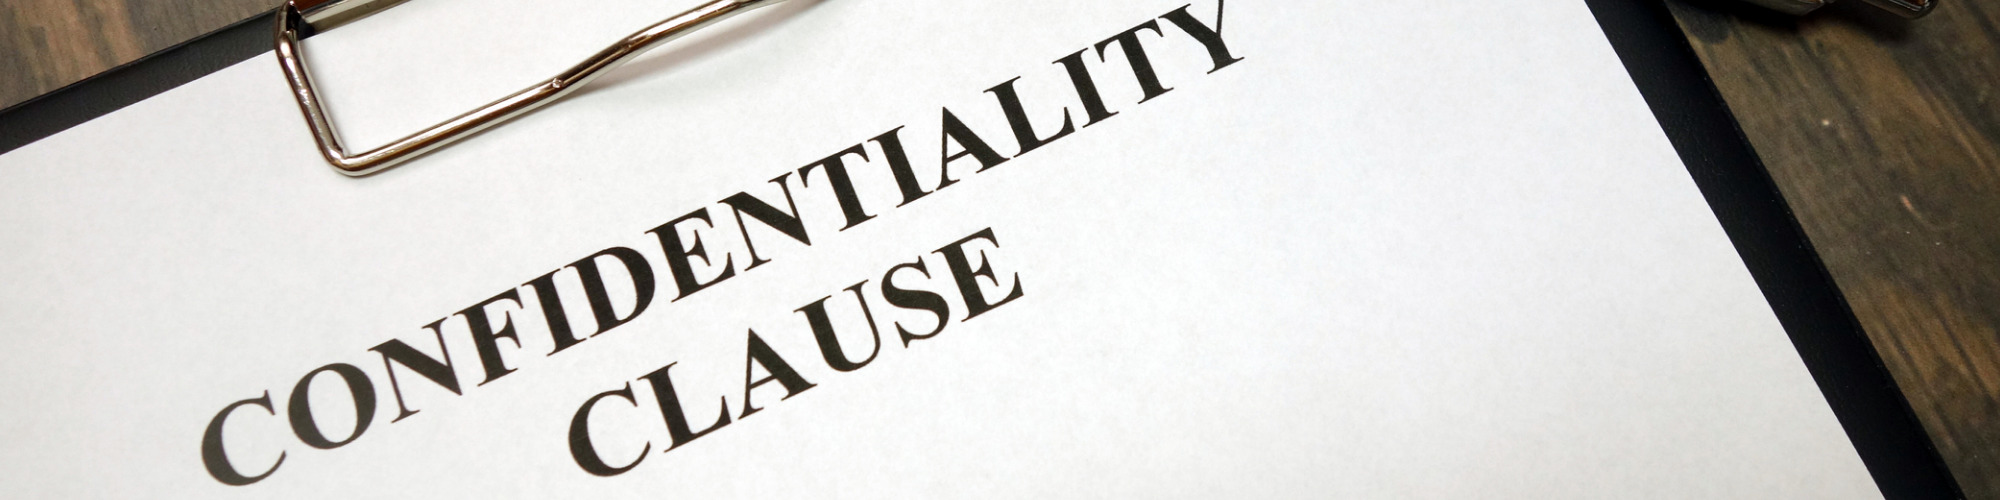 Confidentiality & Conflicts of Interest - Exploring the Knotty Issues for Law Firms 